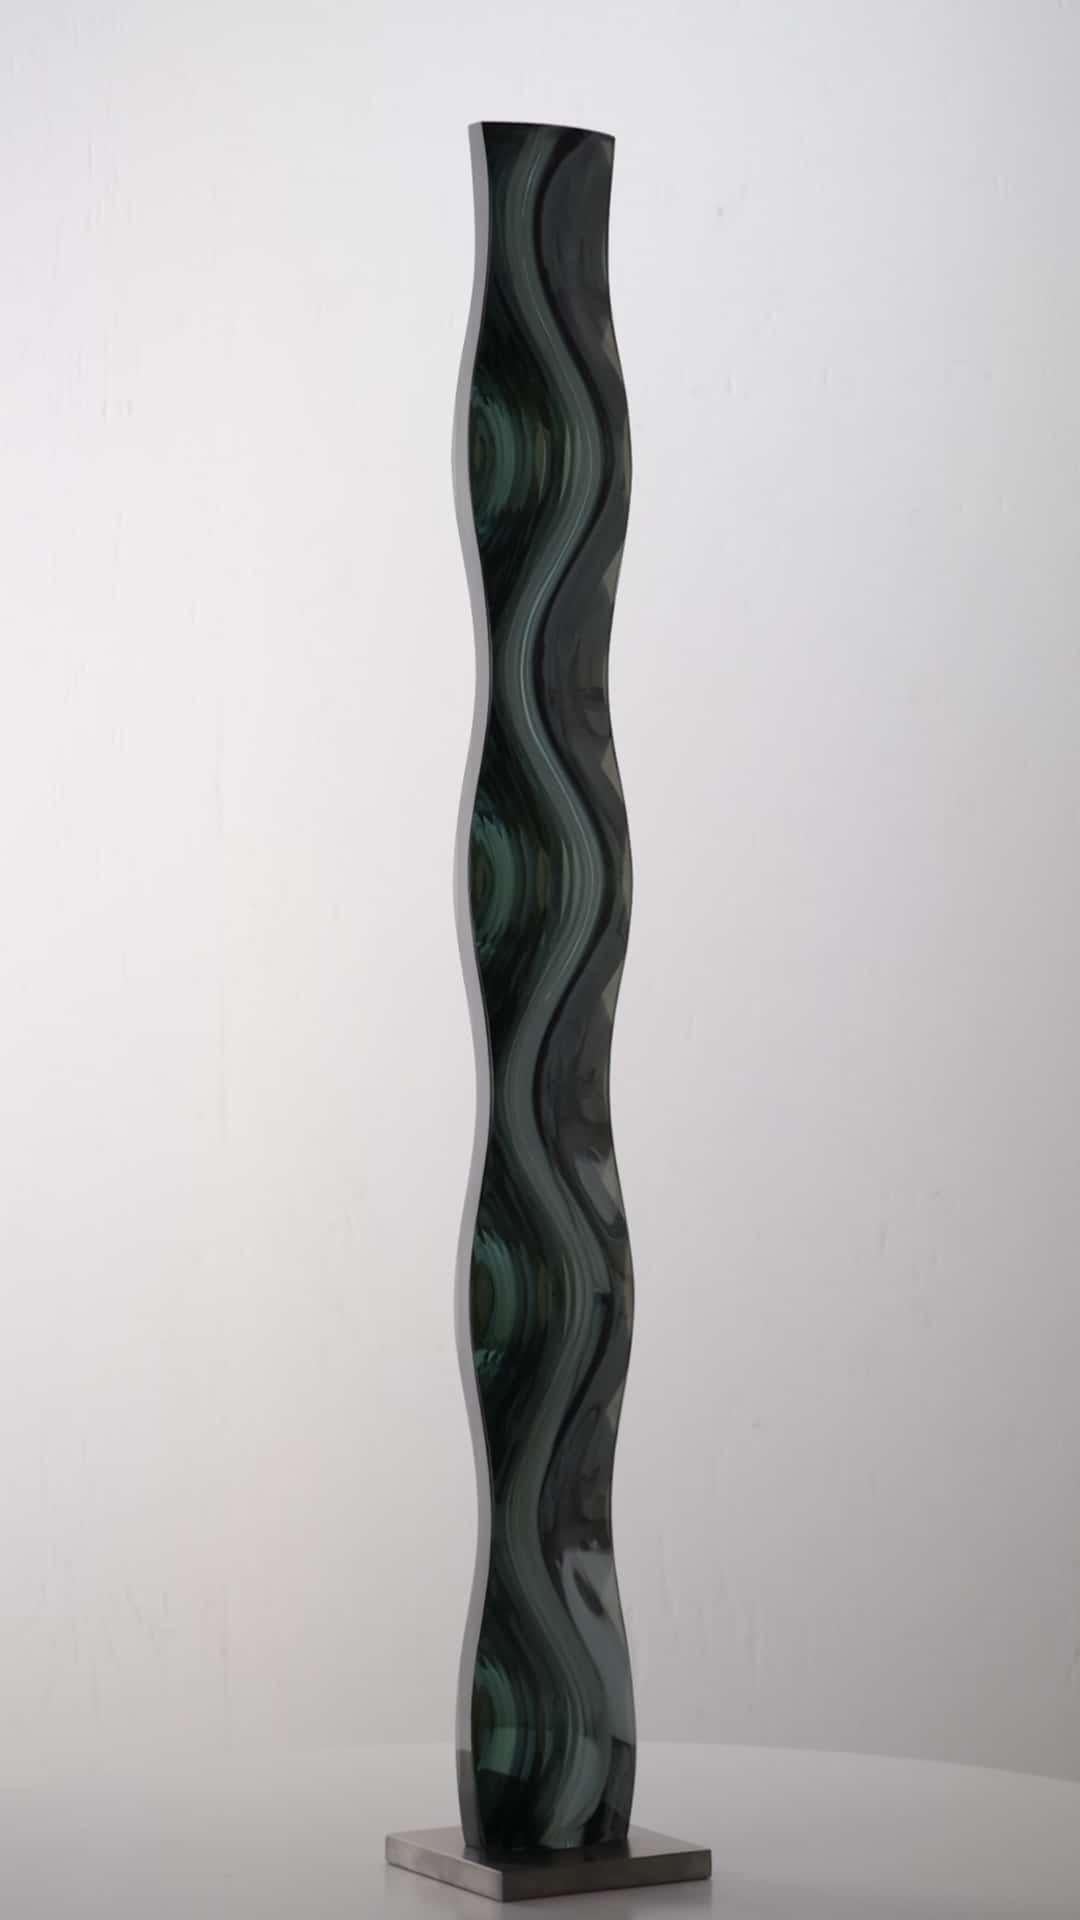 M.190402 by Toshio Iezumi - Contemporary glass sculpture, green, abstract For Sale 2